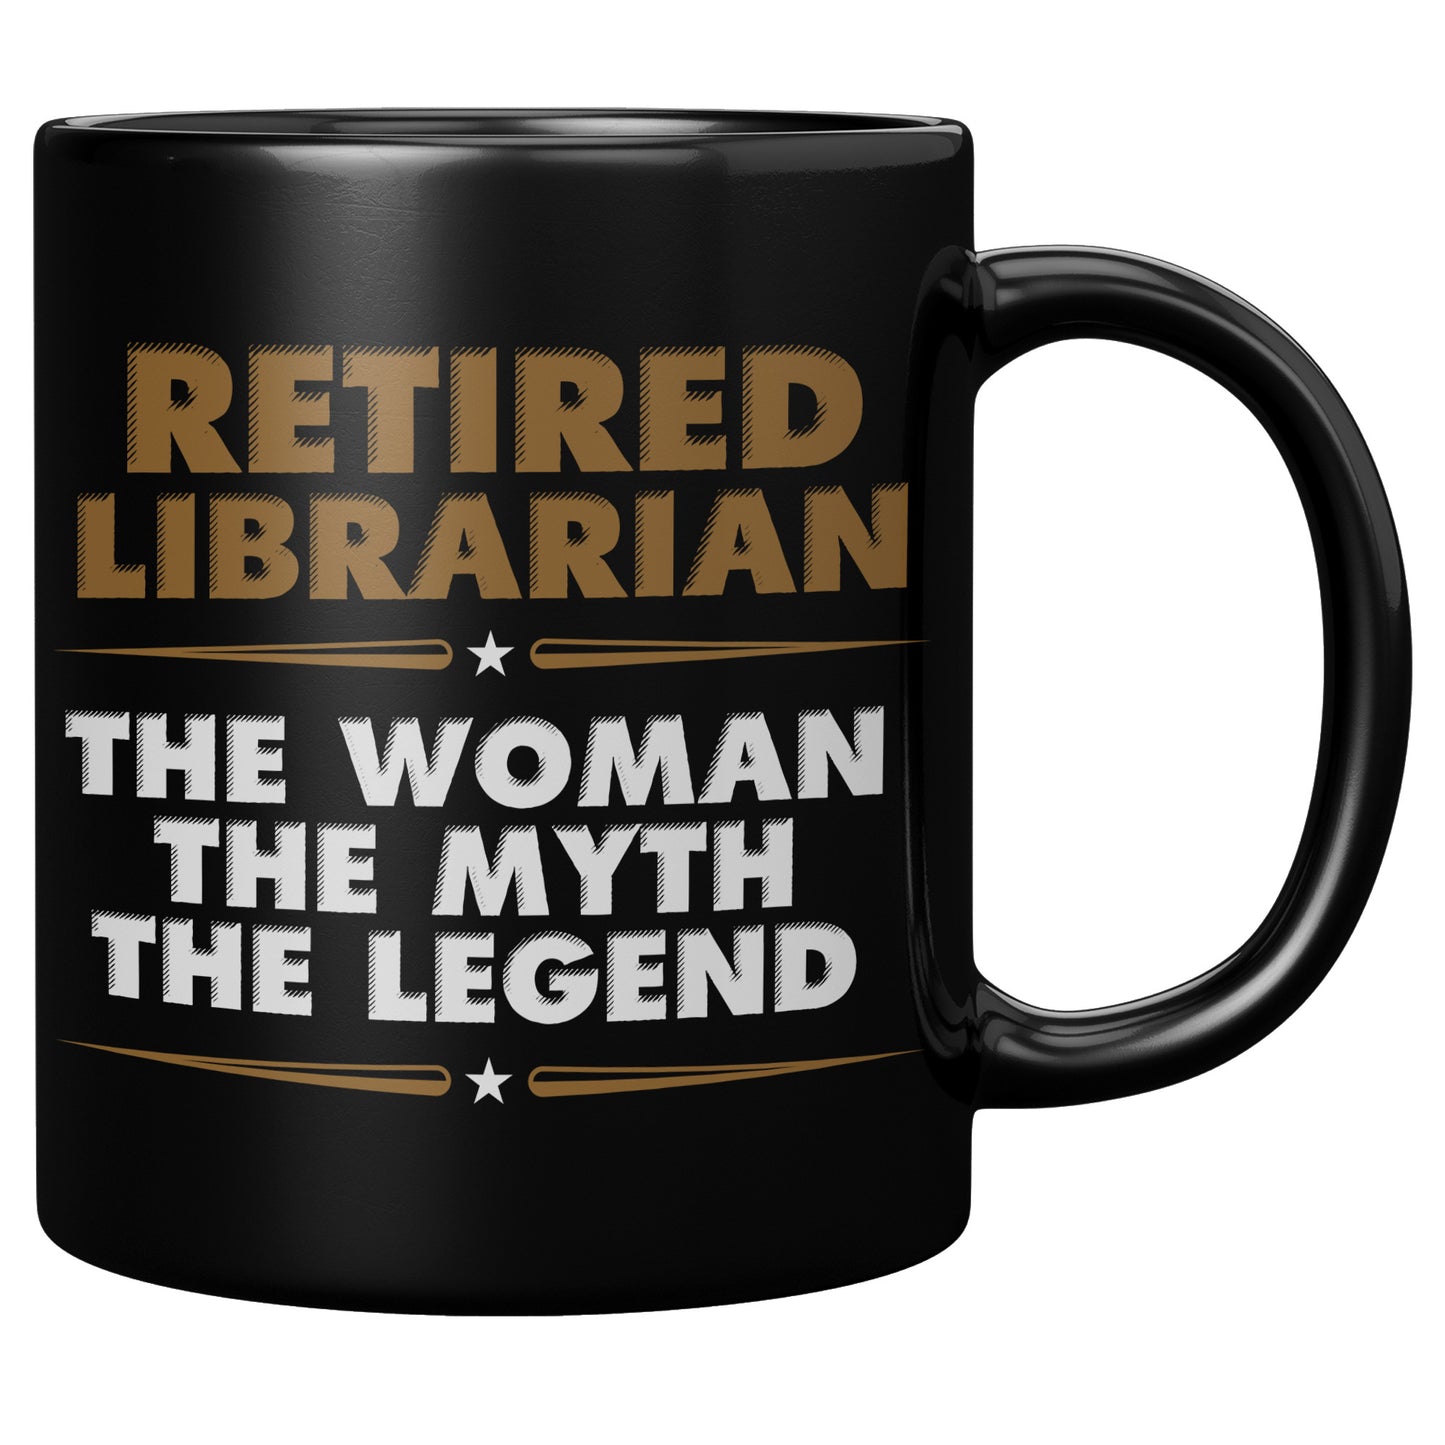 Retired Librarian. The Woman The Myth The Legend | Mug